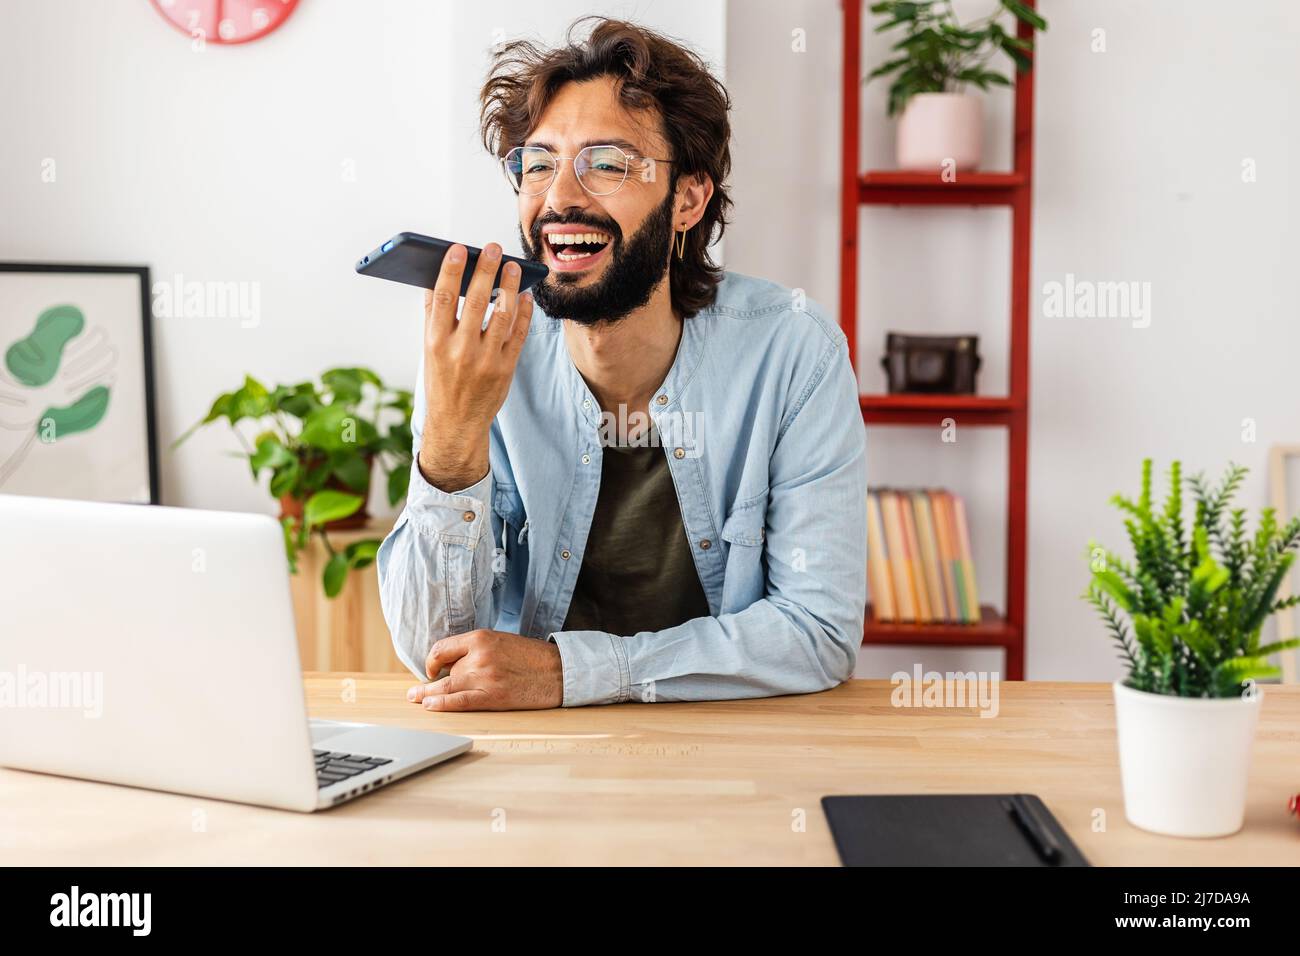 Happy young man smiling while sending a voice message on mobile phone at home Stock Photo